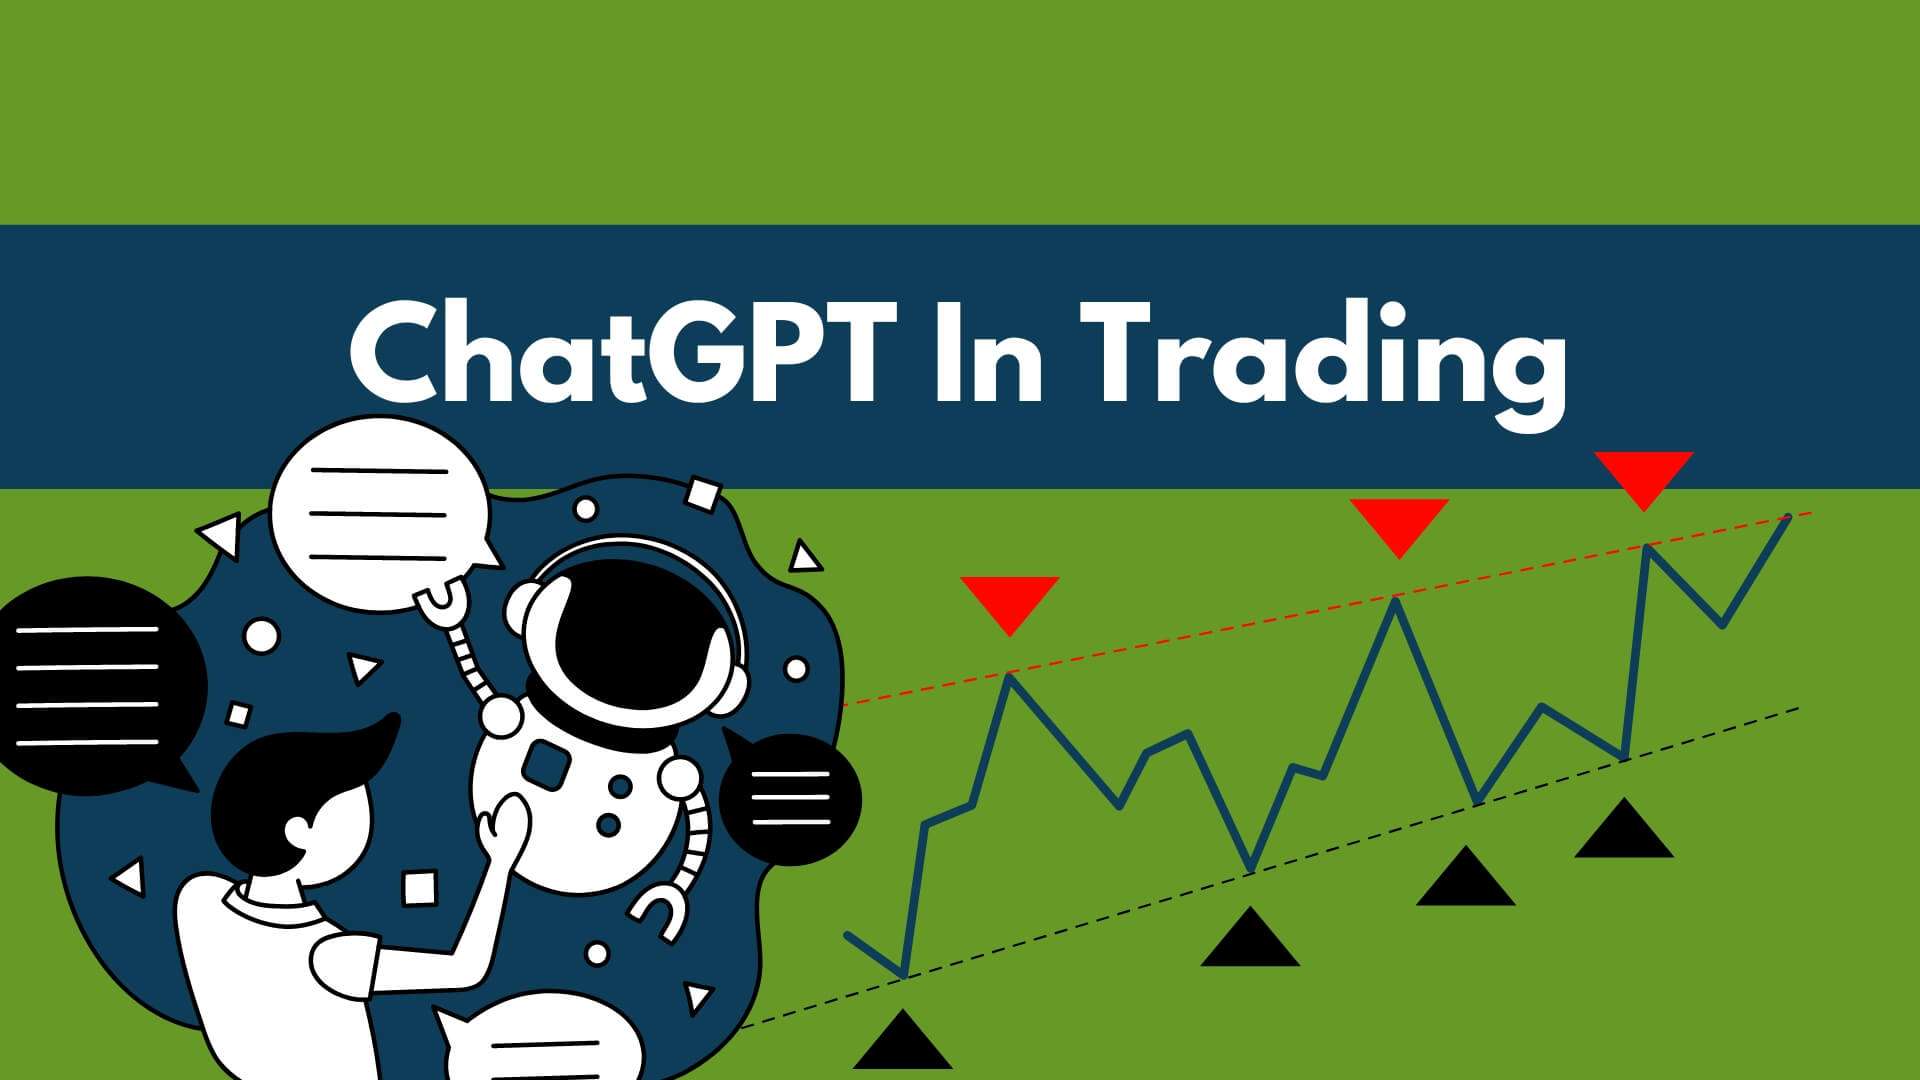 ChatGPT Trading - How To Use ChatGPT For Trading?